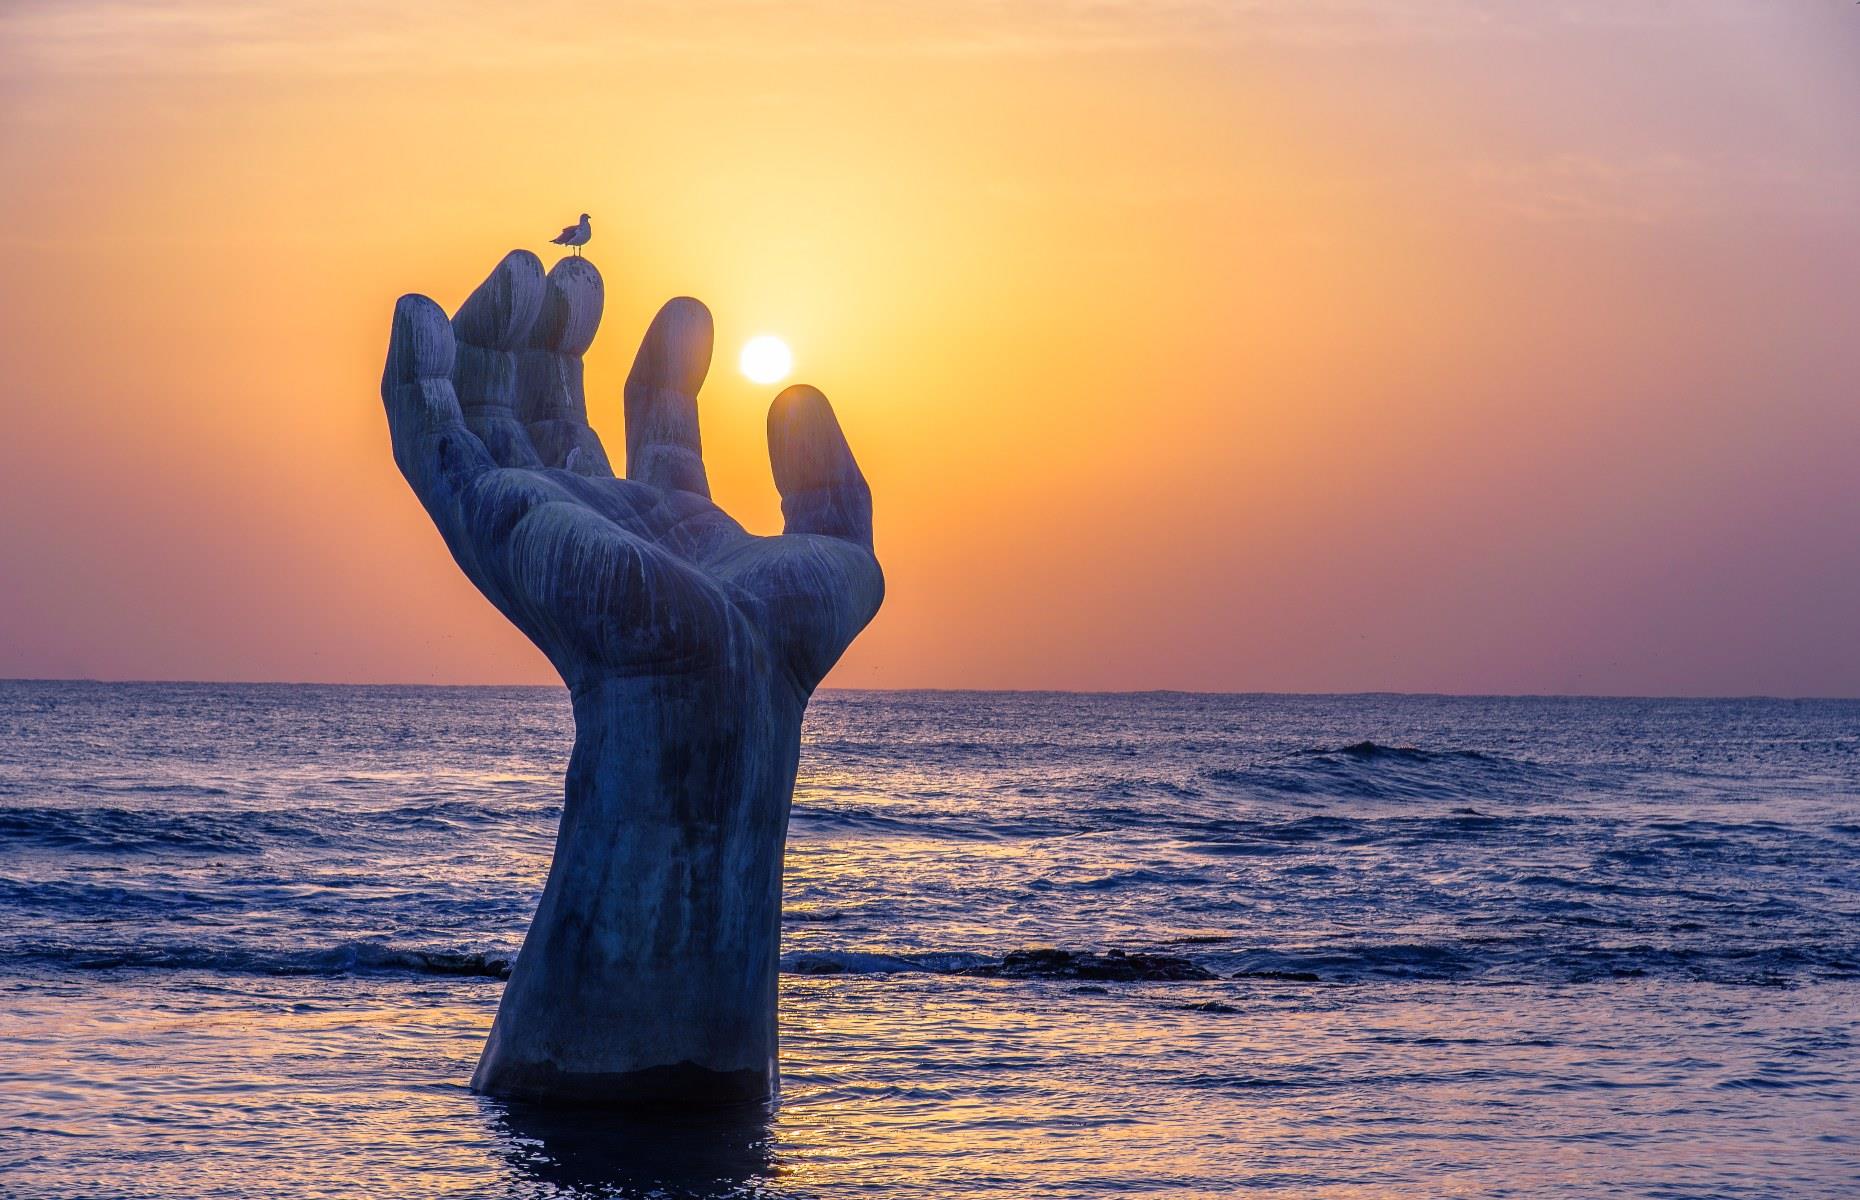 <p>You’ll find this striking bronze sculpture in Homigot, on Korea's easternmost tip, and it’s no coincidence that this town marks the location of South Korea’s earliest first sunrise every year. Early morning is certainly the most captivating time to visit to see the hand silhouetted against the sun. The right hand (pictured) emerges from the ocean, while the left hand is installed on the beachfront.</p>